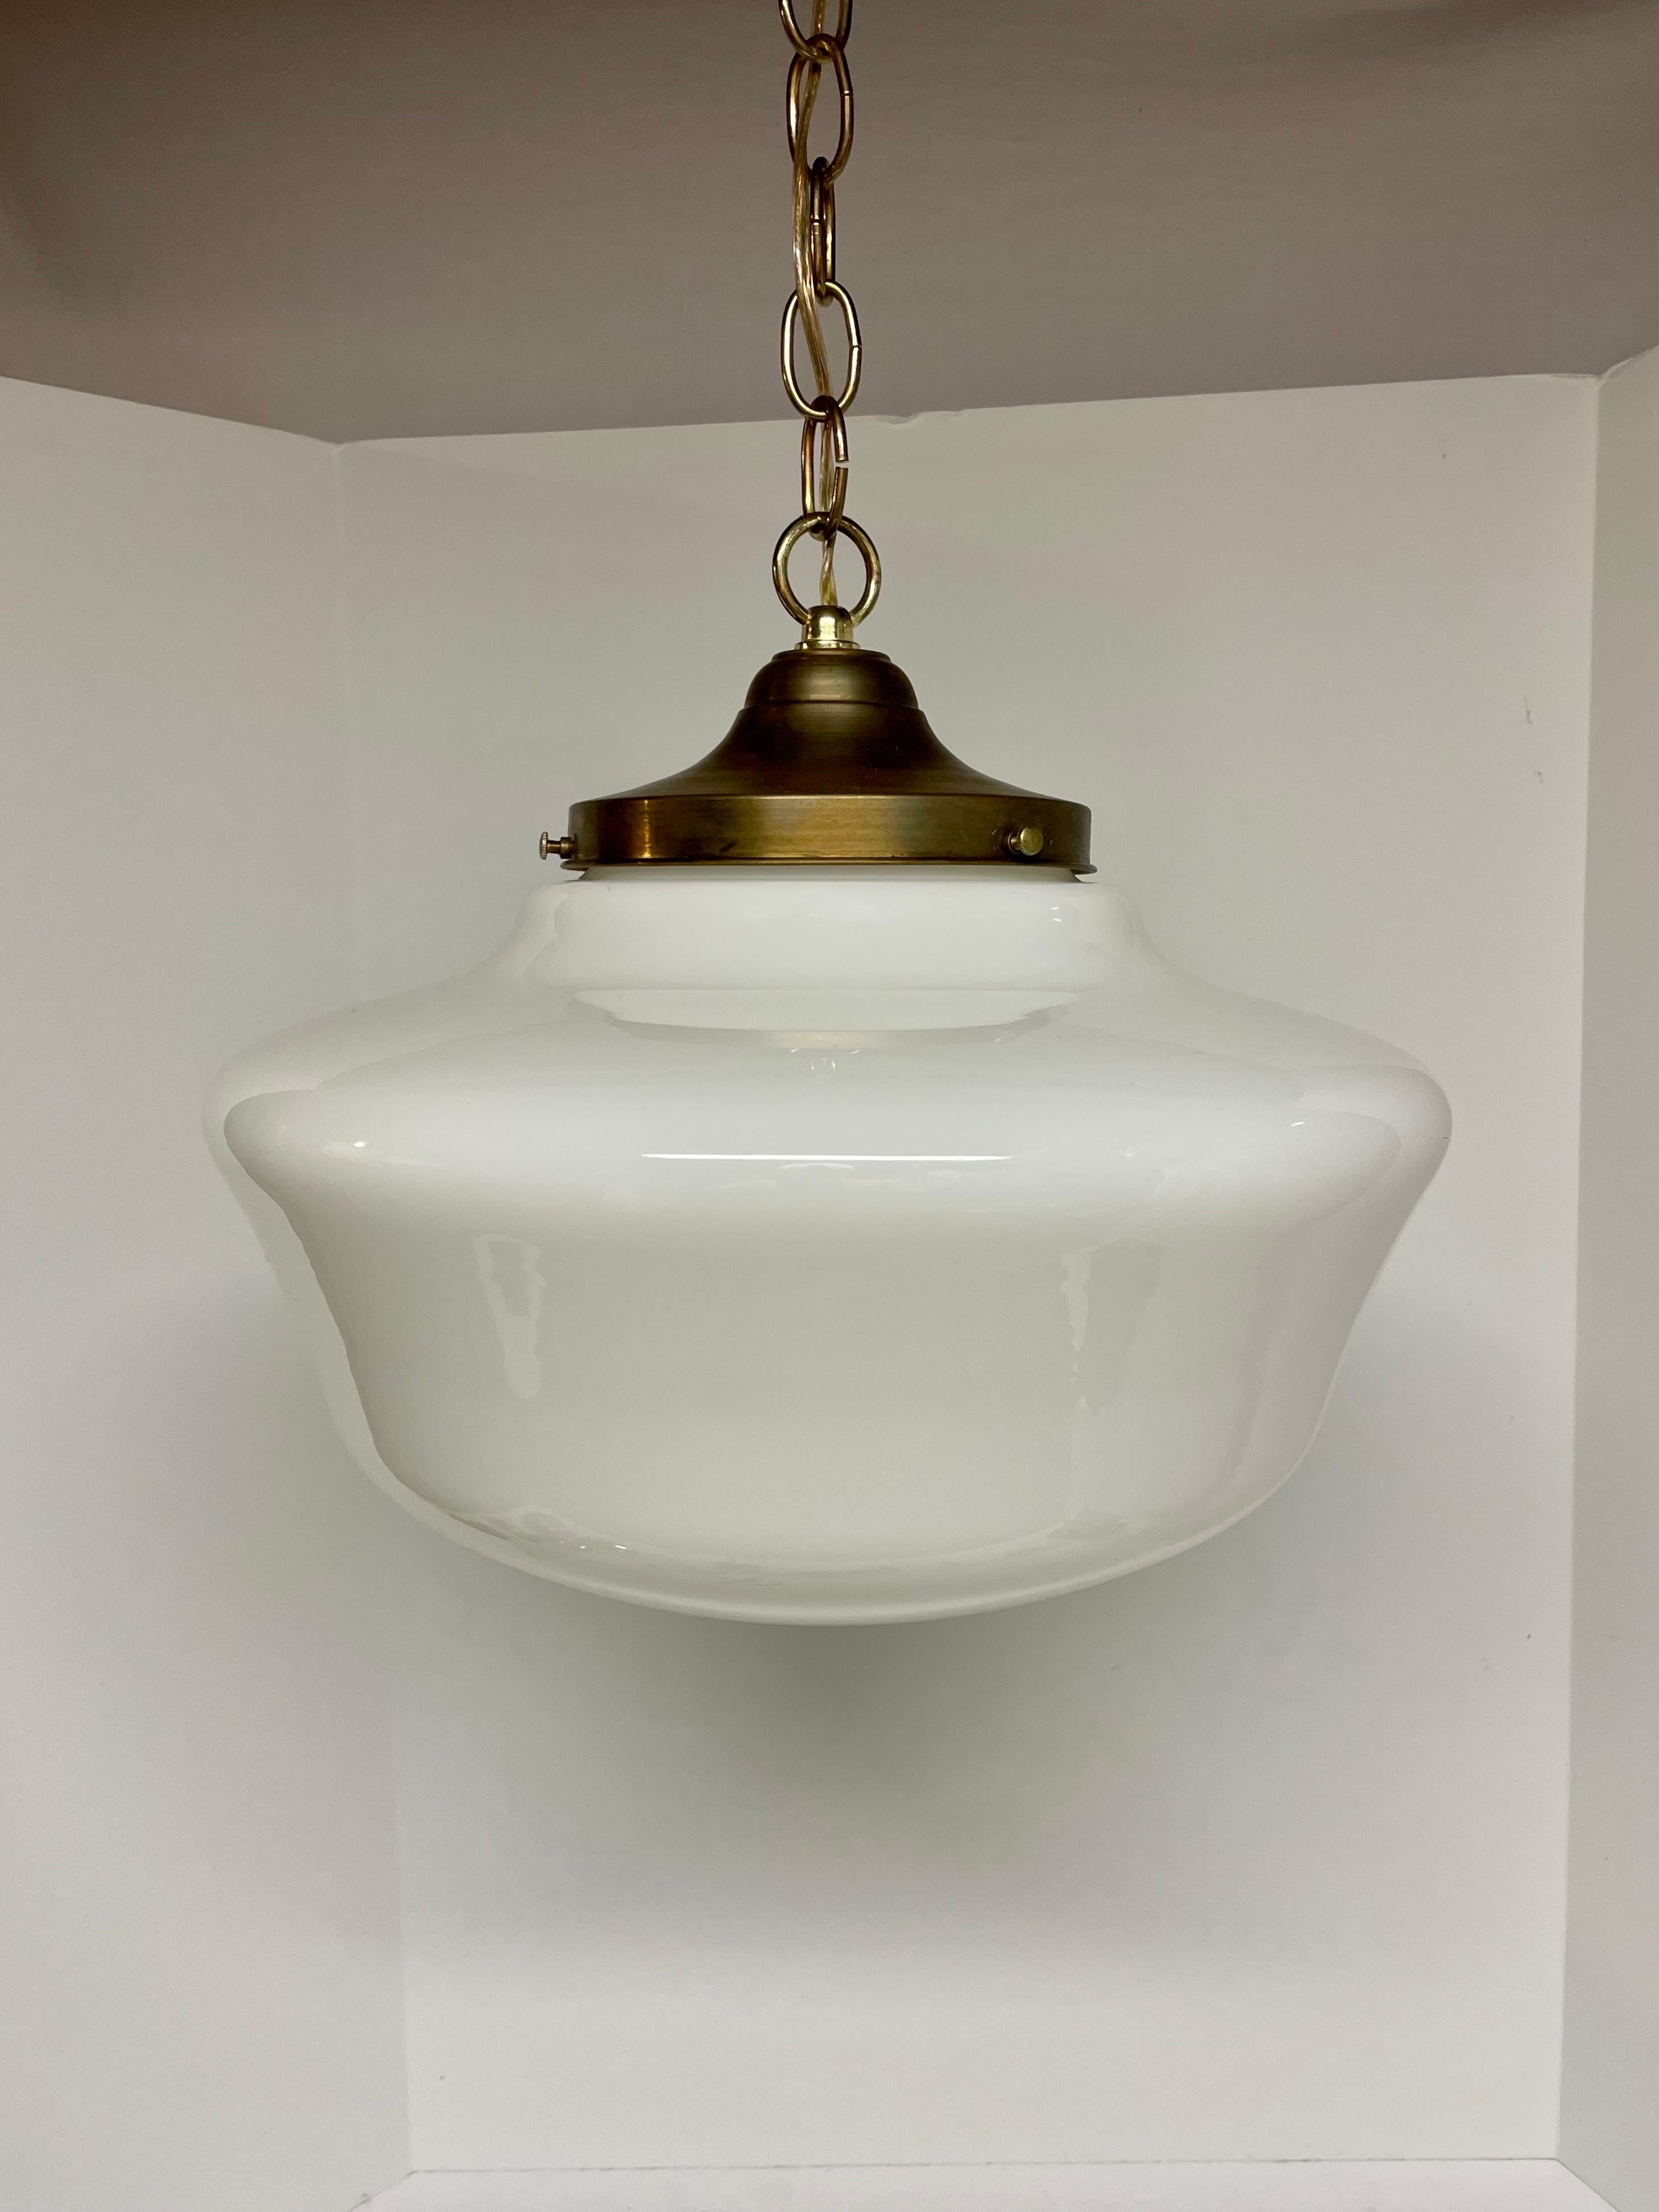 Opaline Glass Schoolhouse Light, a timeless and classic lighting fixture inspired by the iconic design of vintage schoolhouse lighting. This light features a simple and clean silhouette with a rounded glass shade that provides a warm and inviting